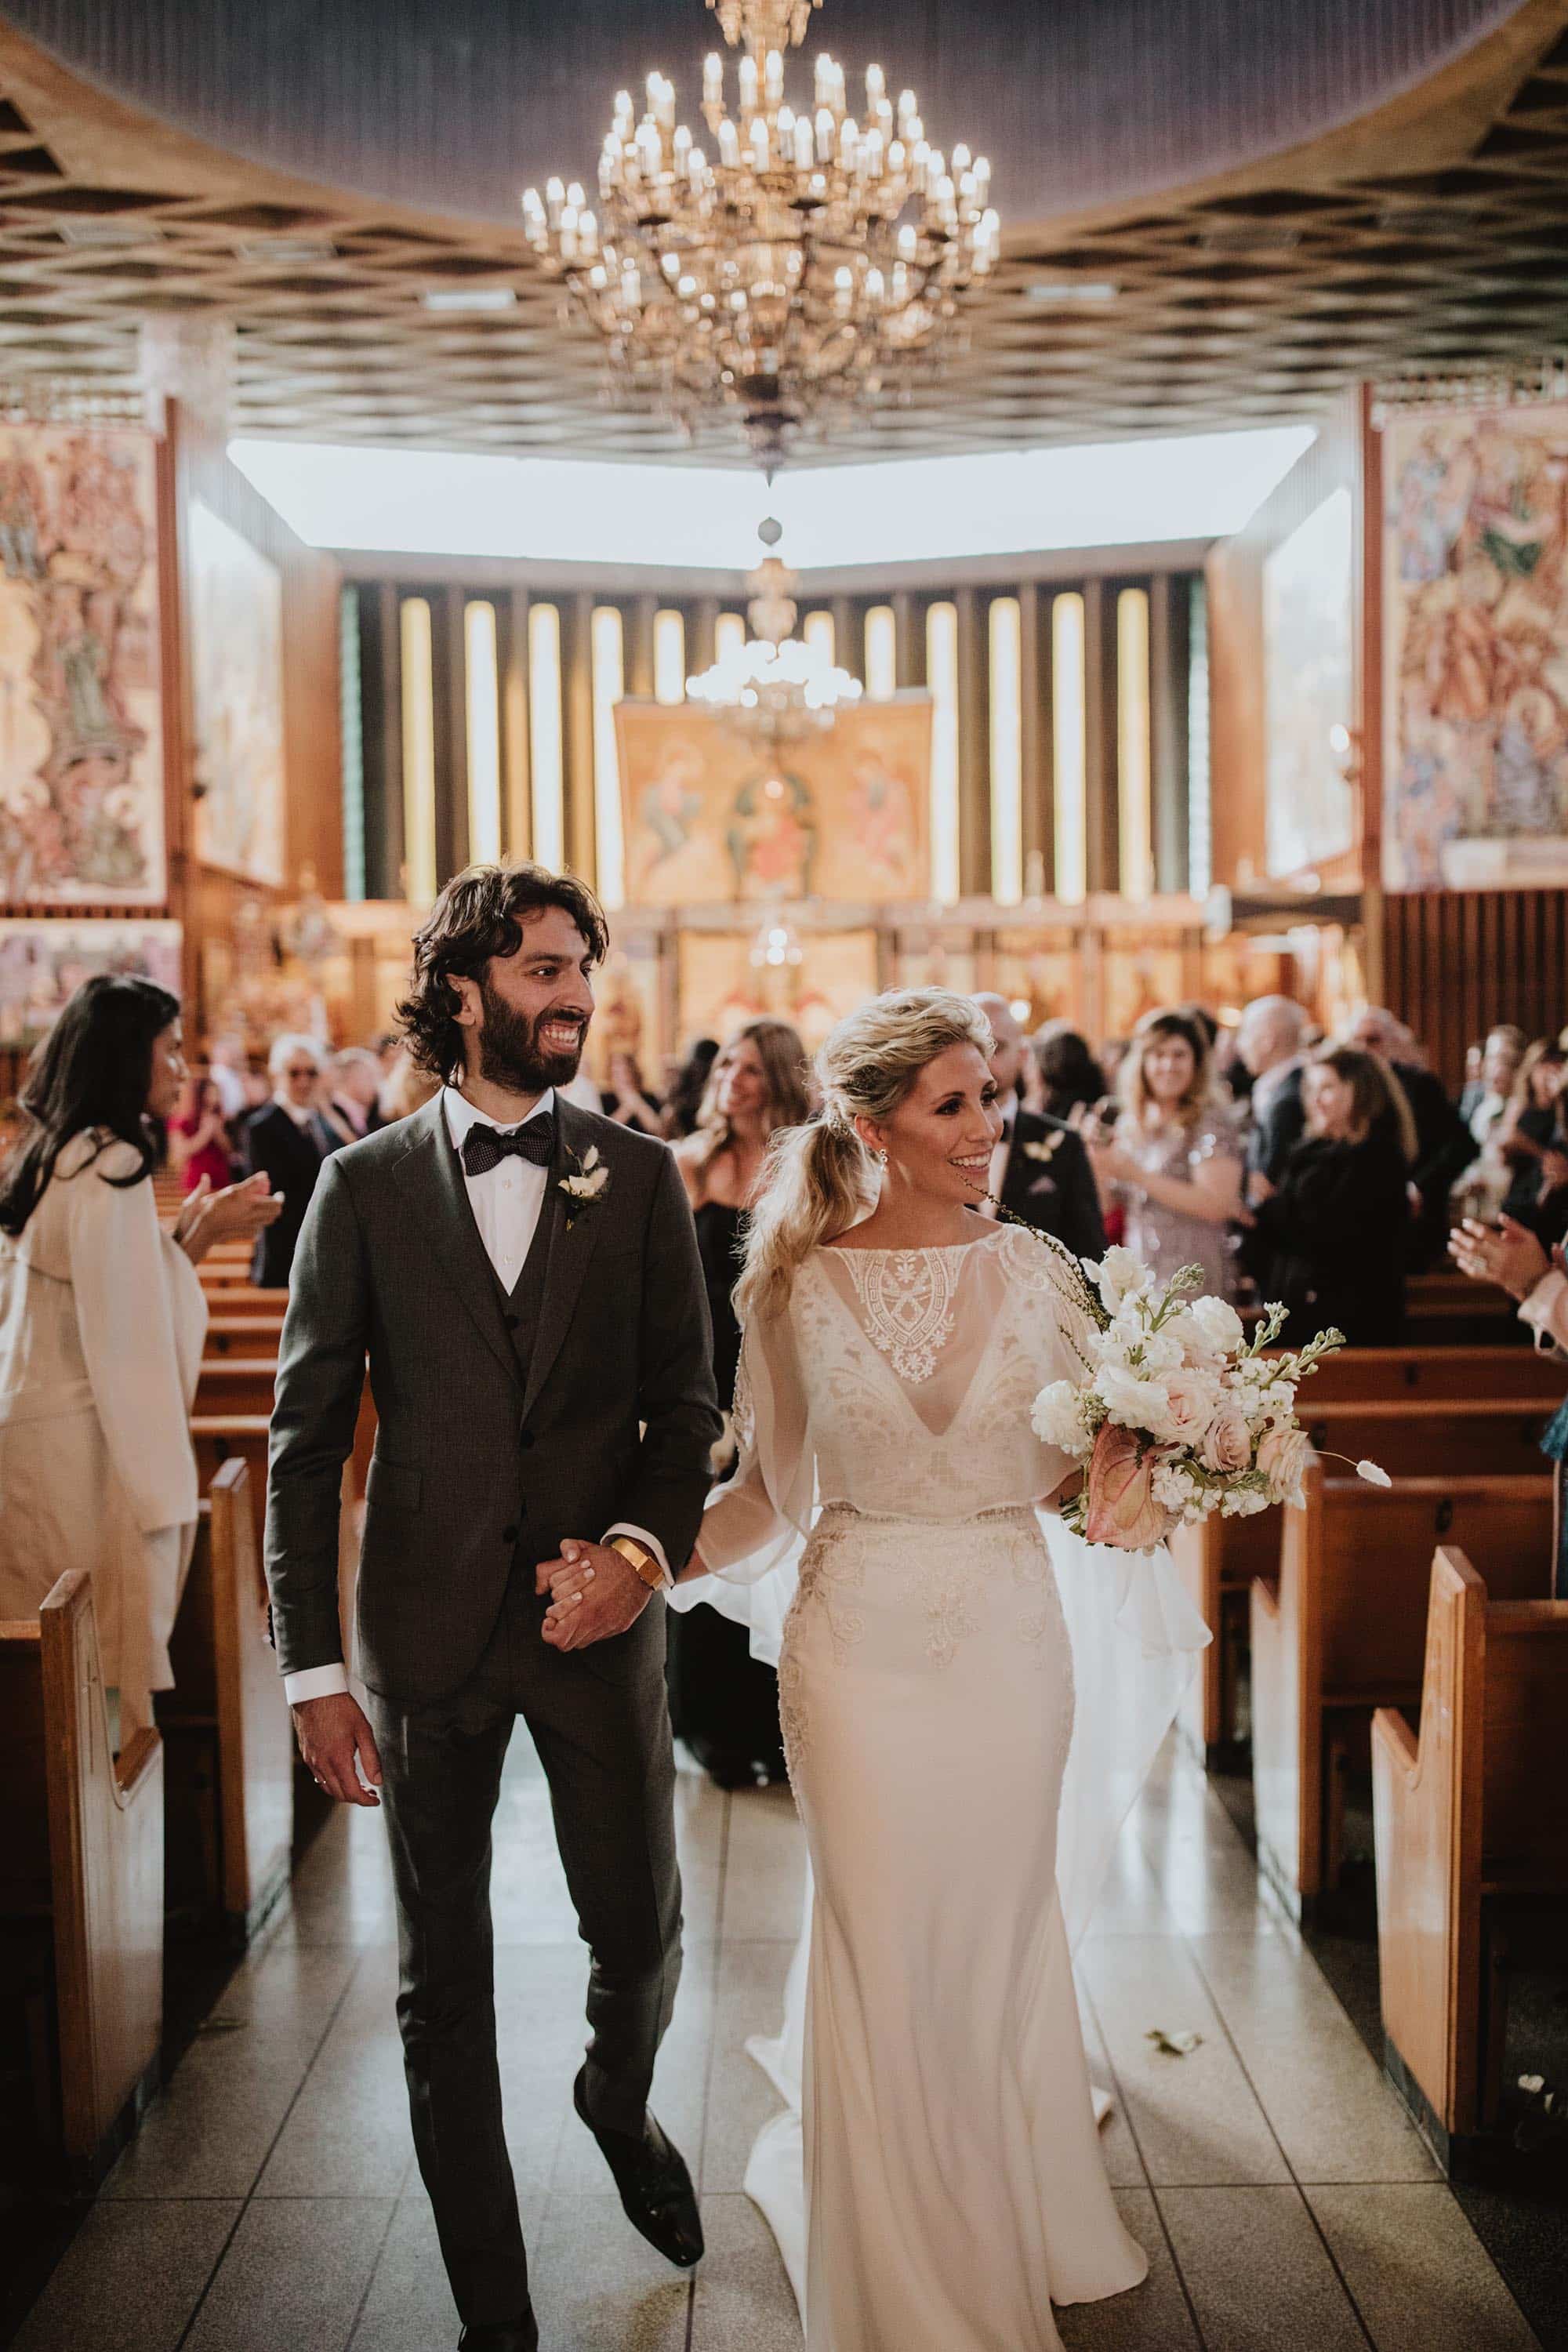 Entrepots Dominion Wedding In Montreal - Epic Montreal Church - Wedding Photographer Brent Calis